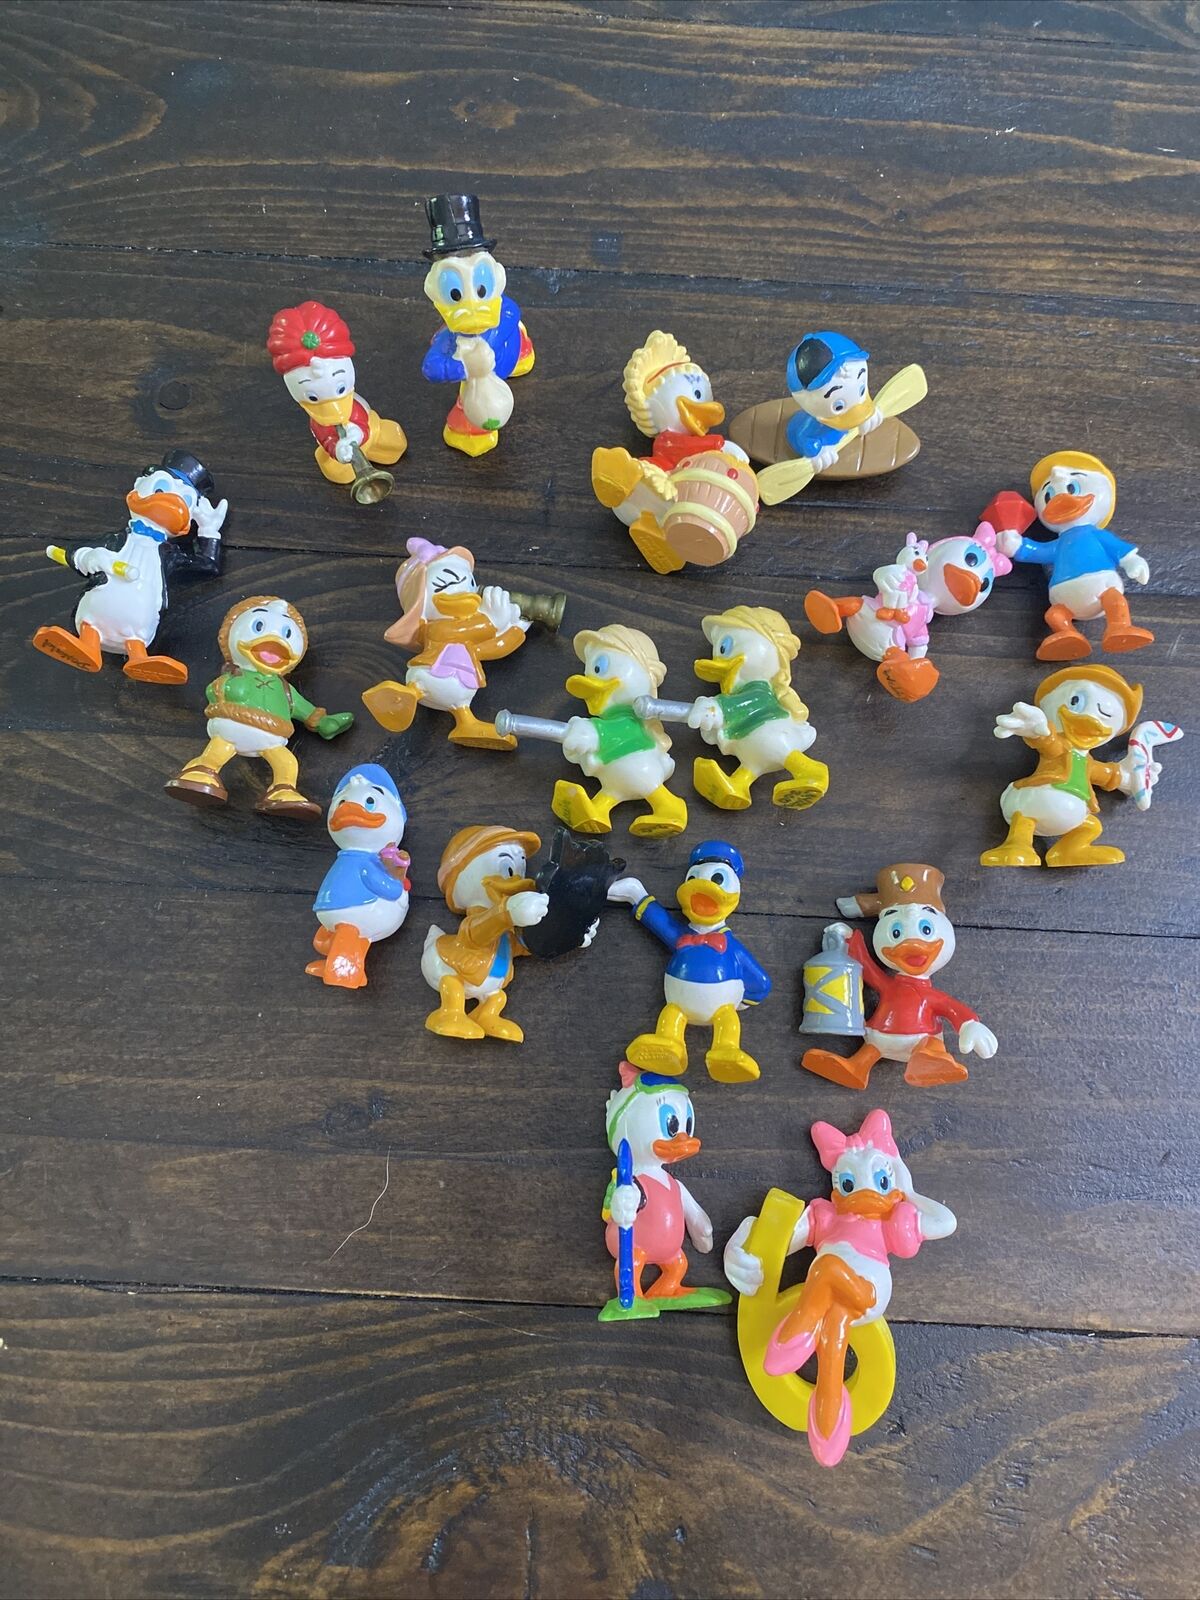 Lot of 18 Donald Duck vintage Disney PVC figures Applause And Kellogg